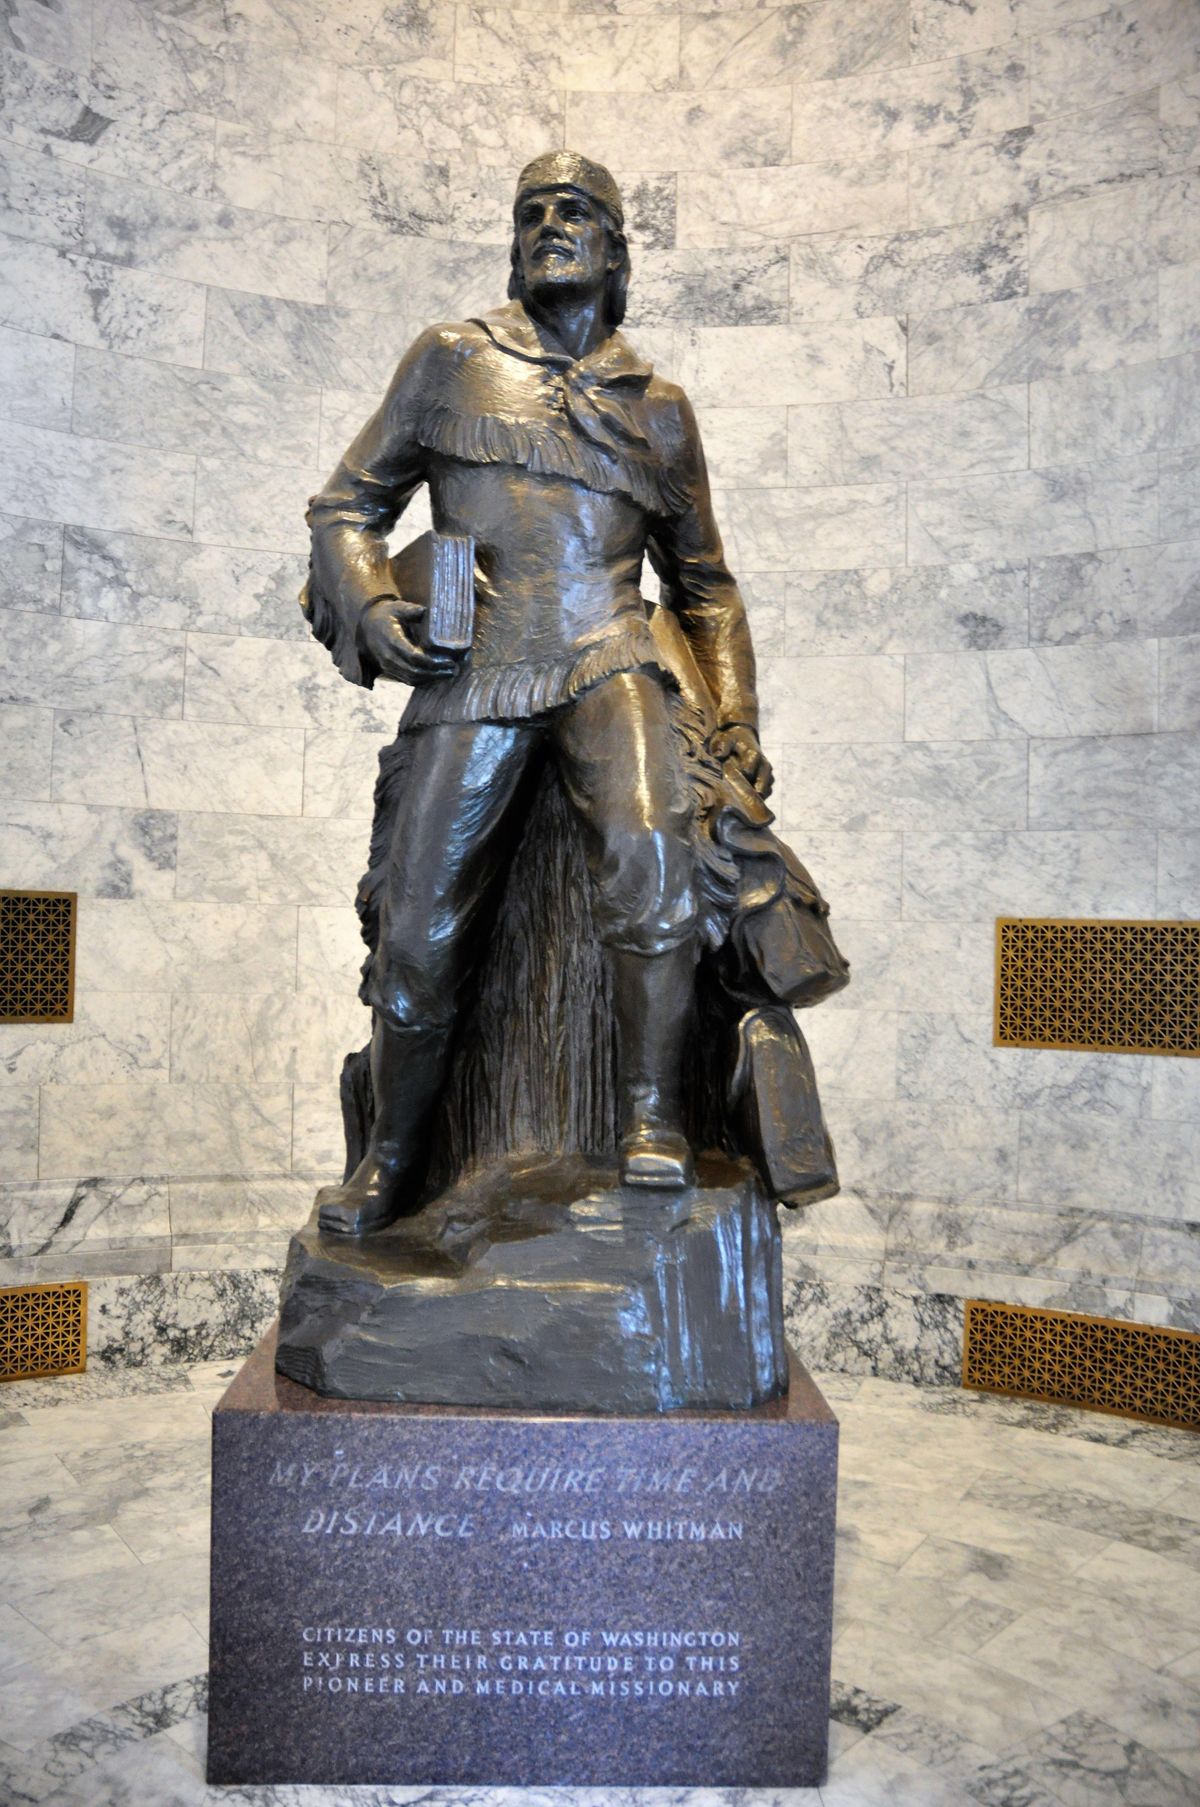 A statue depicting Marcus Whitman stands in the U.S. Capitol and in the state Capitol in Olympia. (Jim Camden / The Spokesman-Review)